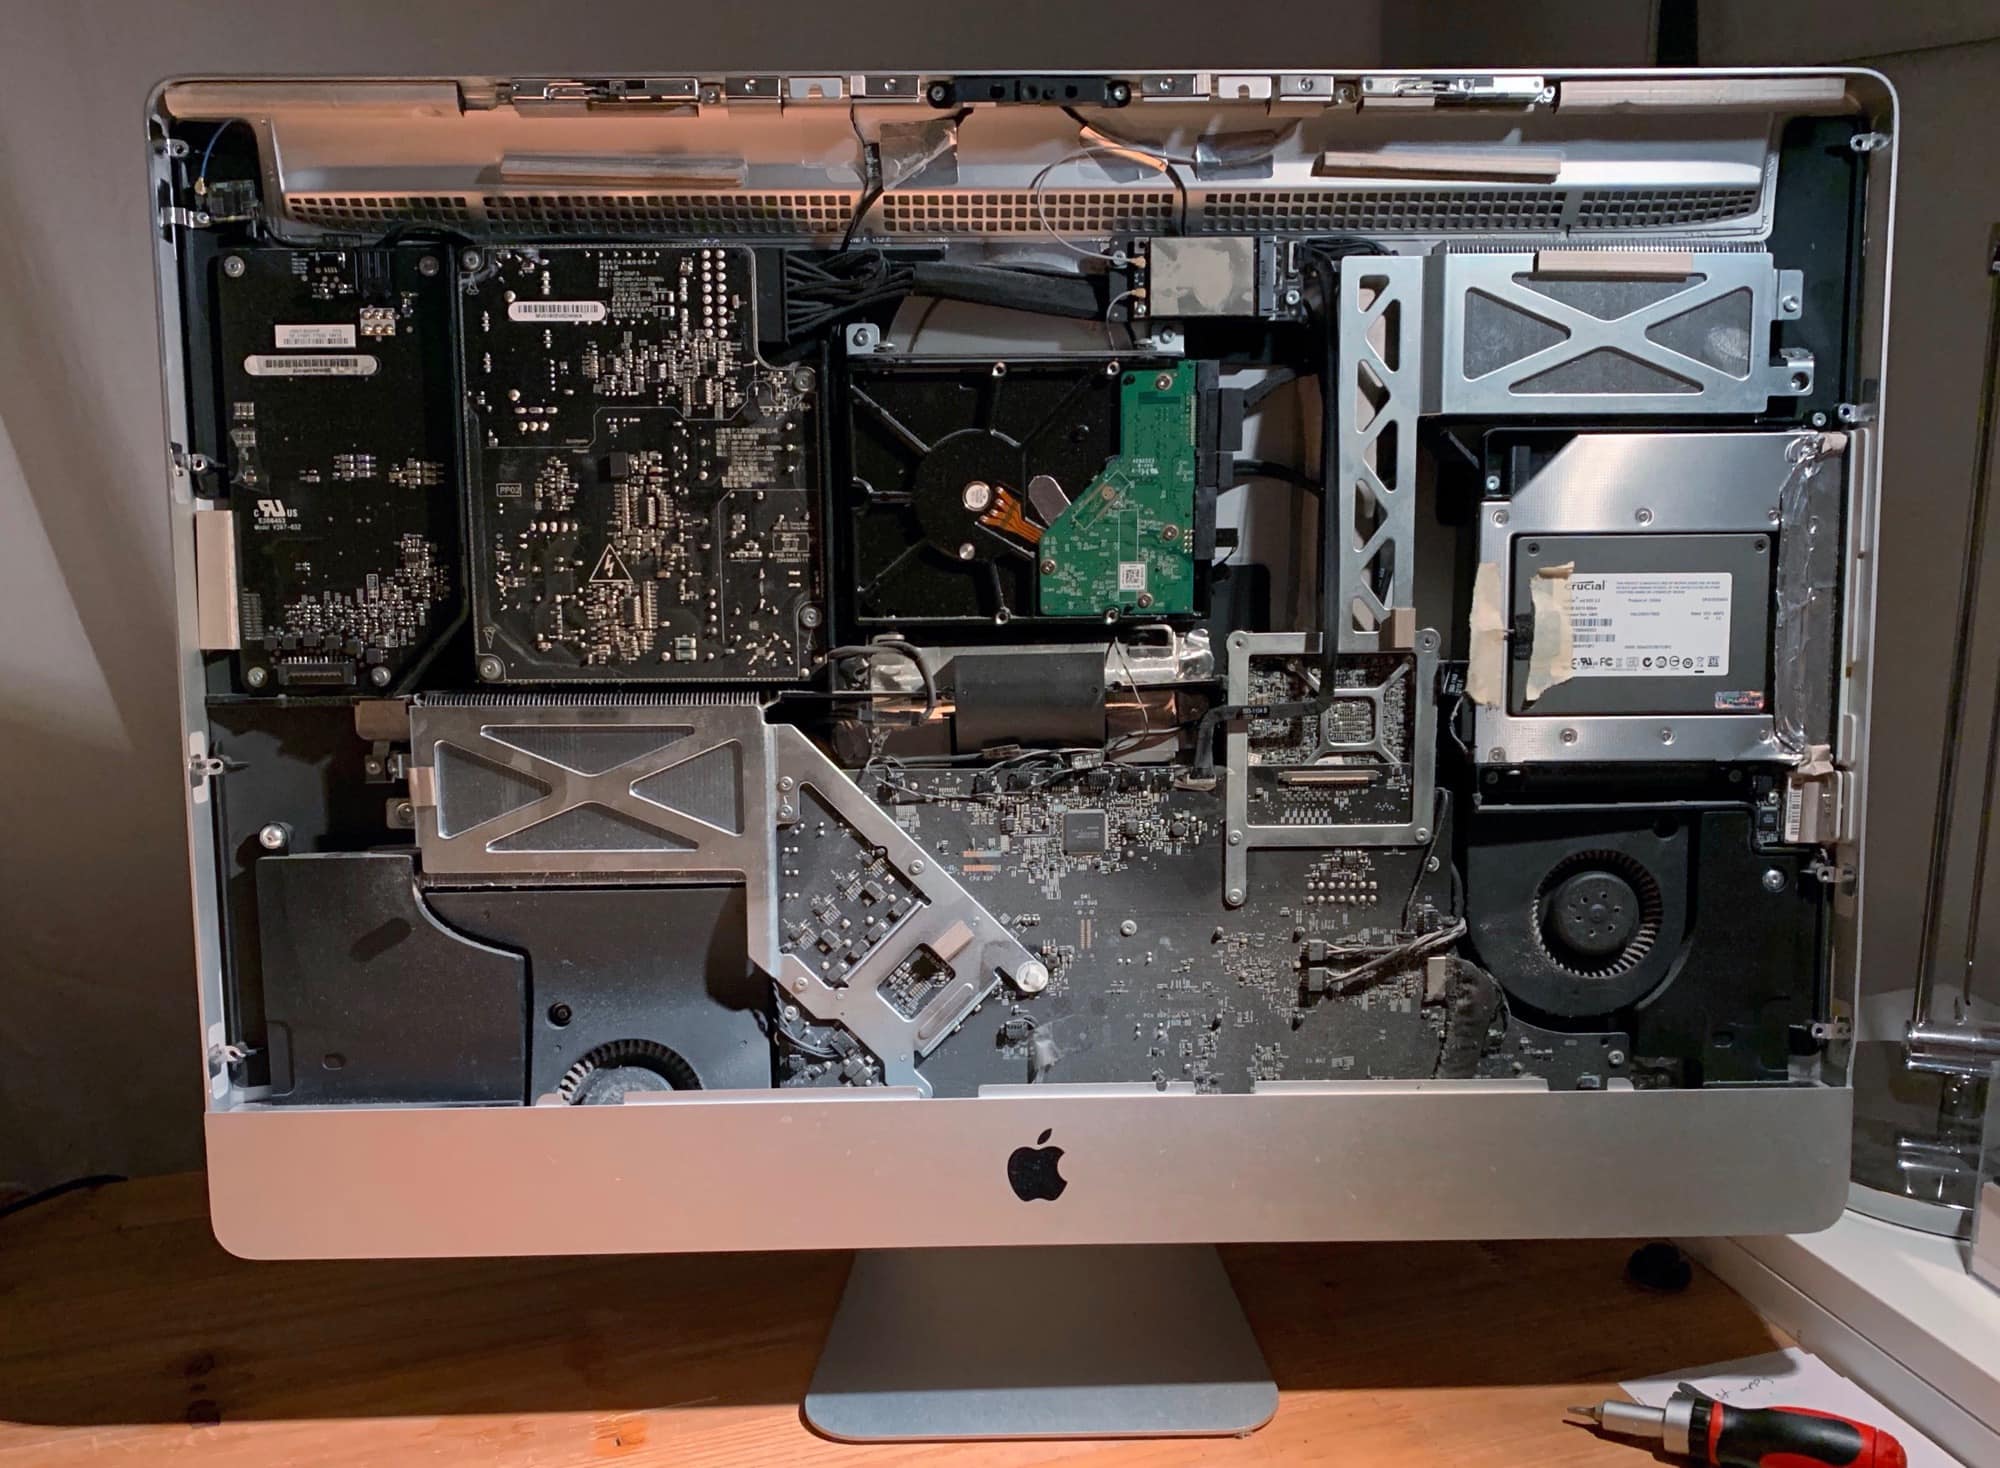 Believe it or not, this old iMac still has a lot of life left in it.